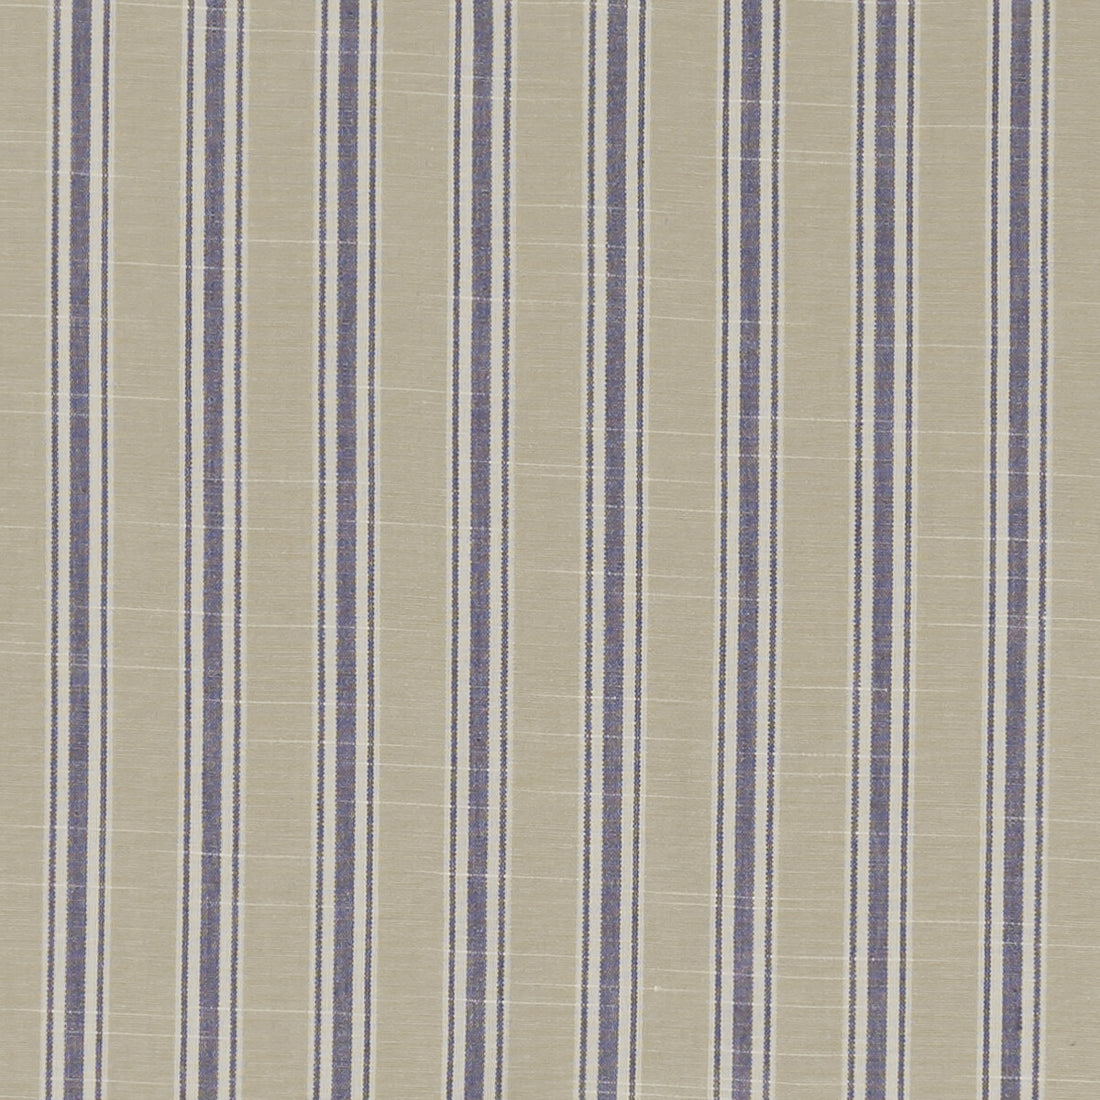 Thornwick fabric in denim color - pattern F1311/04.CAC.0 - by Clarke And Clarke in the Bempton By Studio G For C&amp;C collection